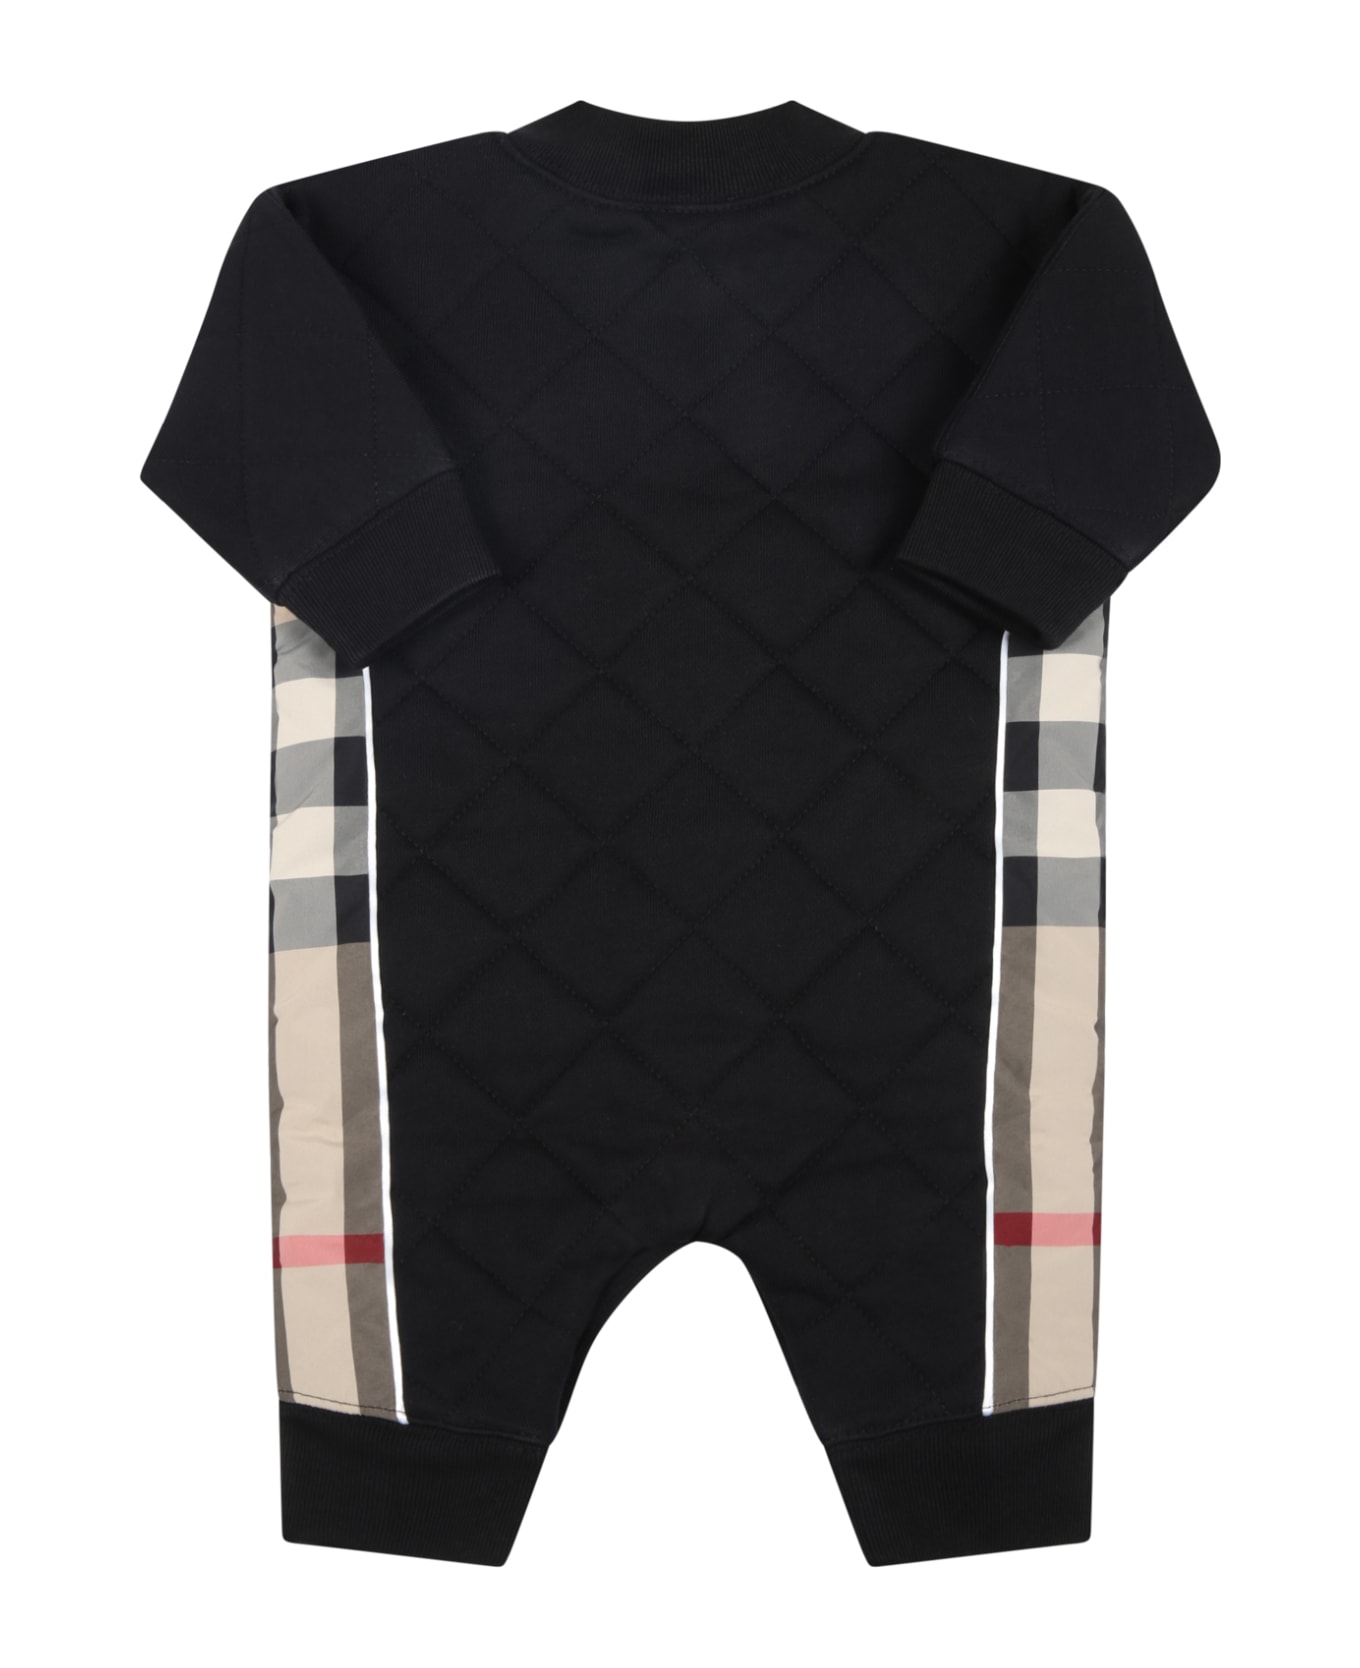 Burberry Black Babygrow For Baby Kids With Logo - Black